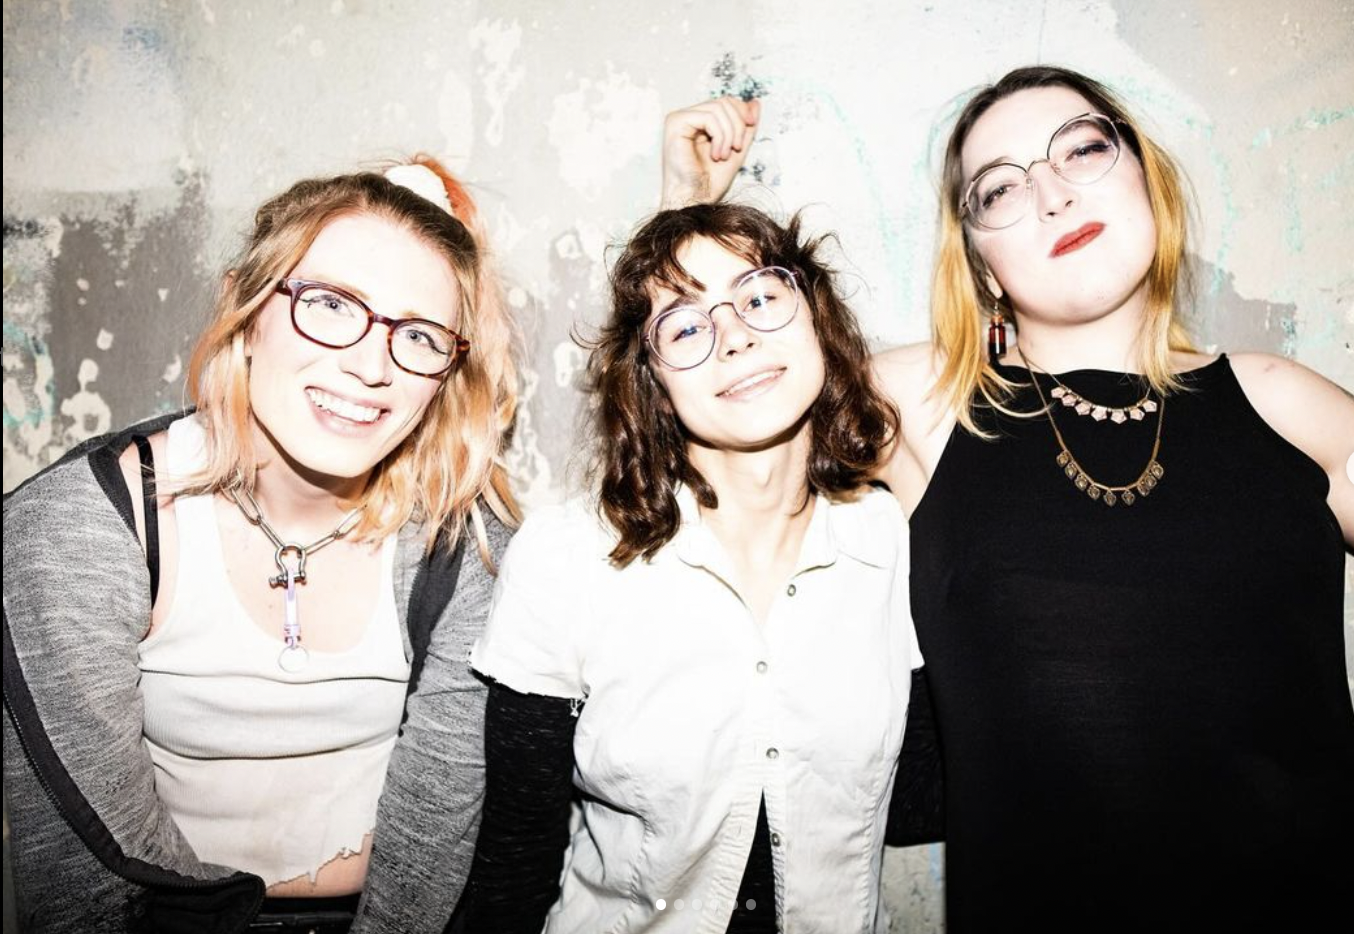 “Fake punk girl band” Crush Fund crush gender fundamentalism (and your eardrums) on New Fixation EP